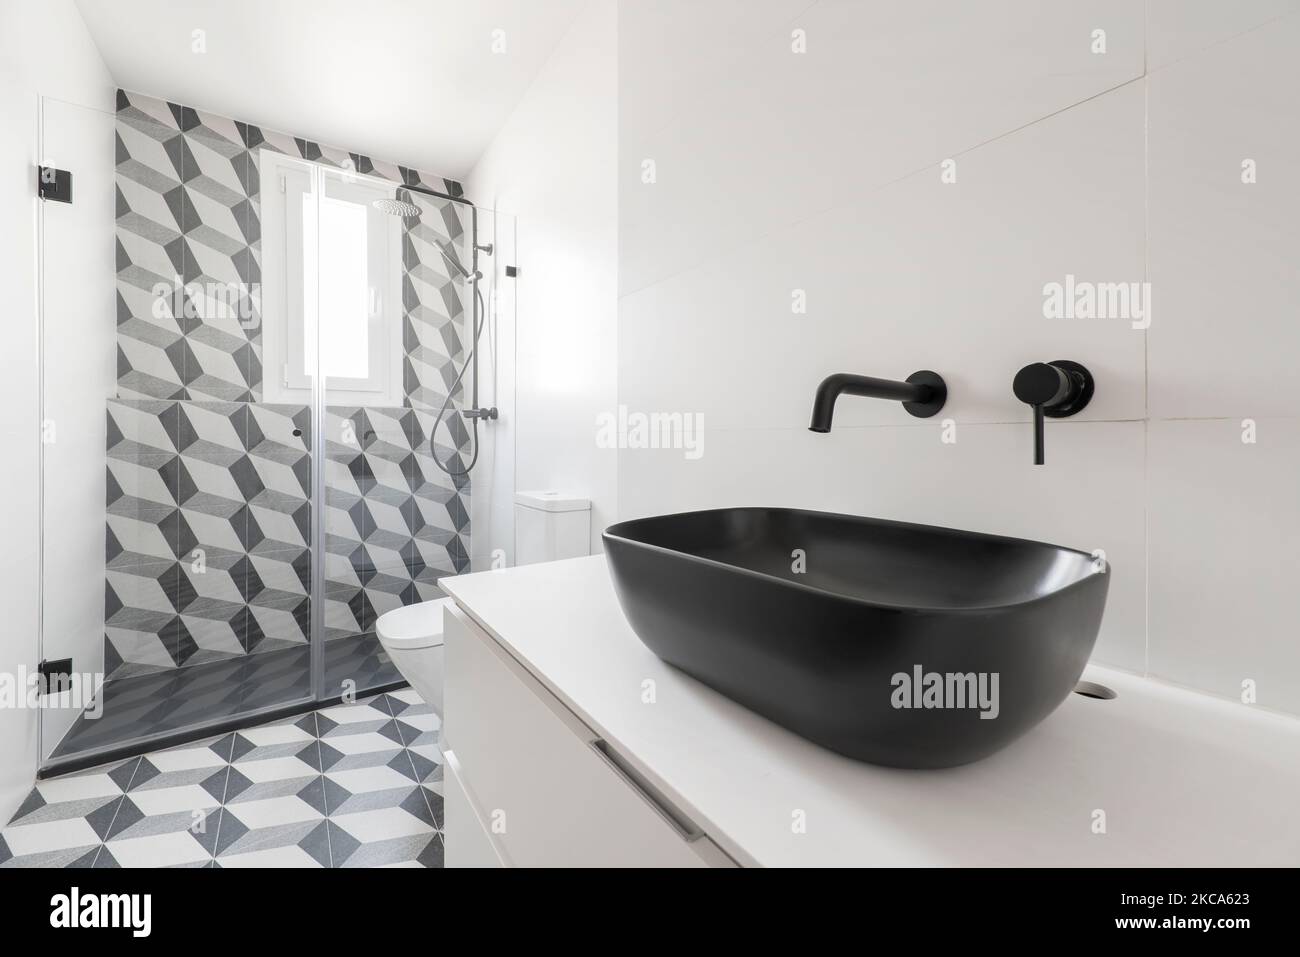 Minimalist design bathroom with wall cabinet, glass-enclosed cabin, black taps and black porcelain sink Stock Photo